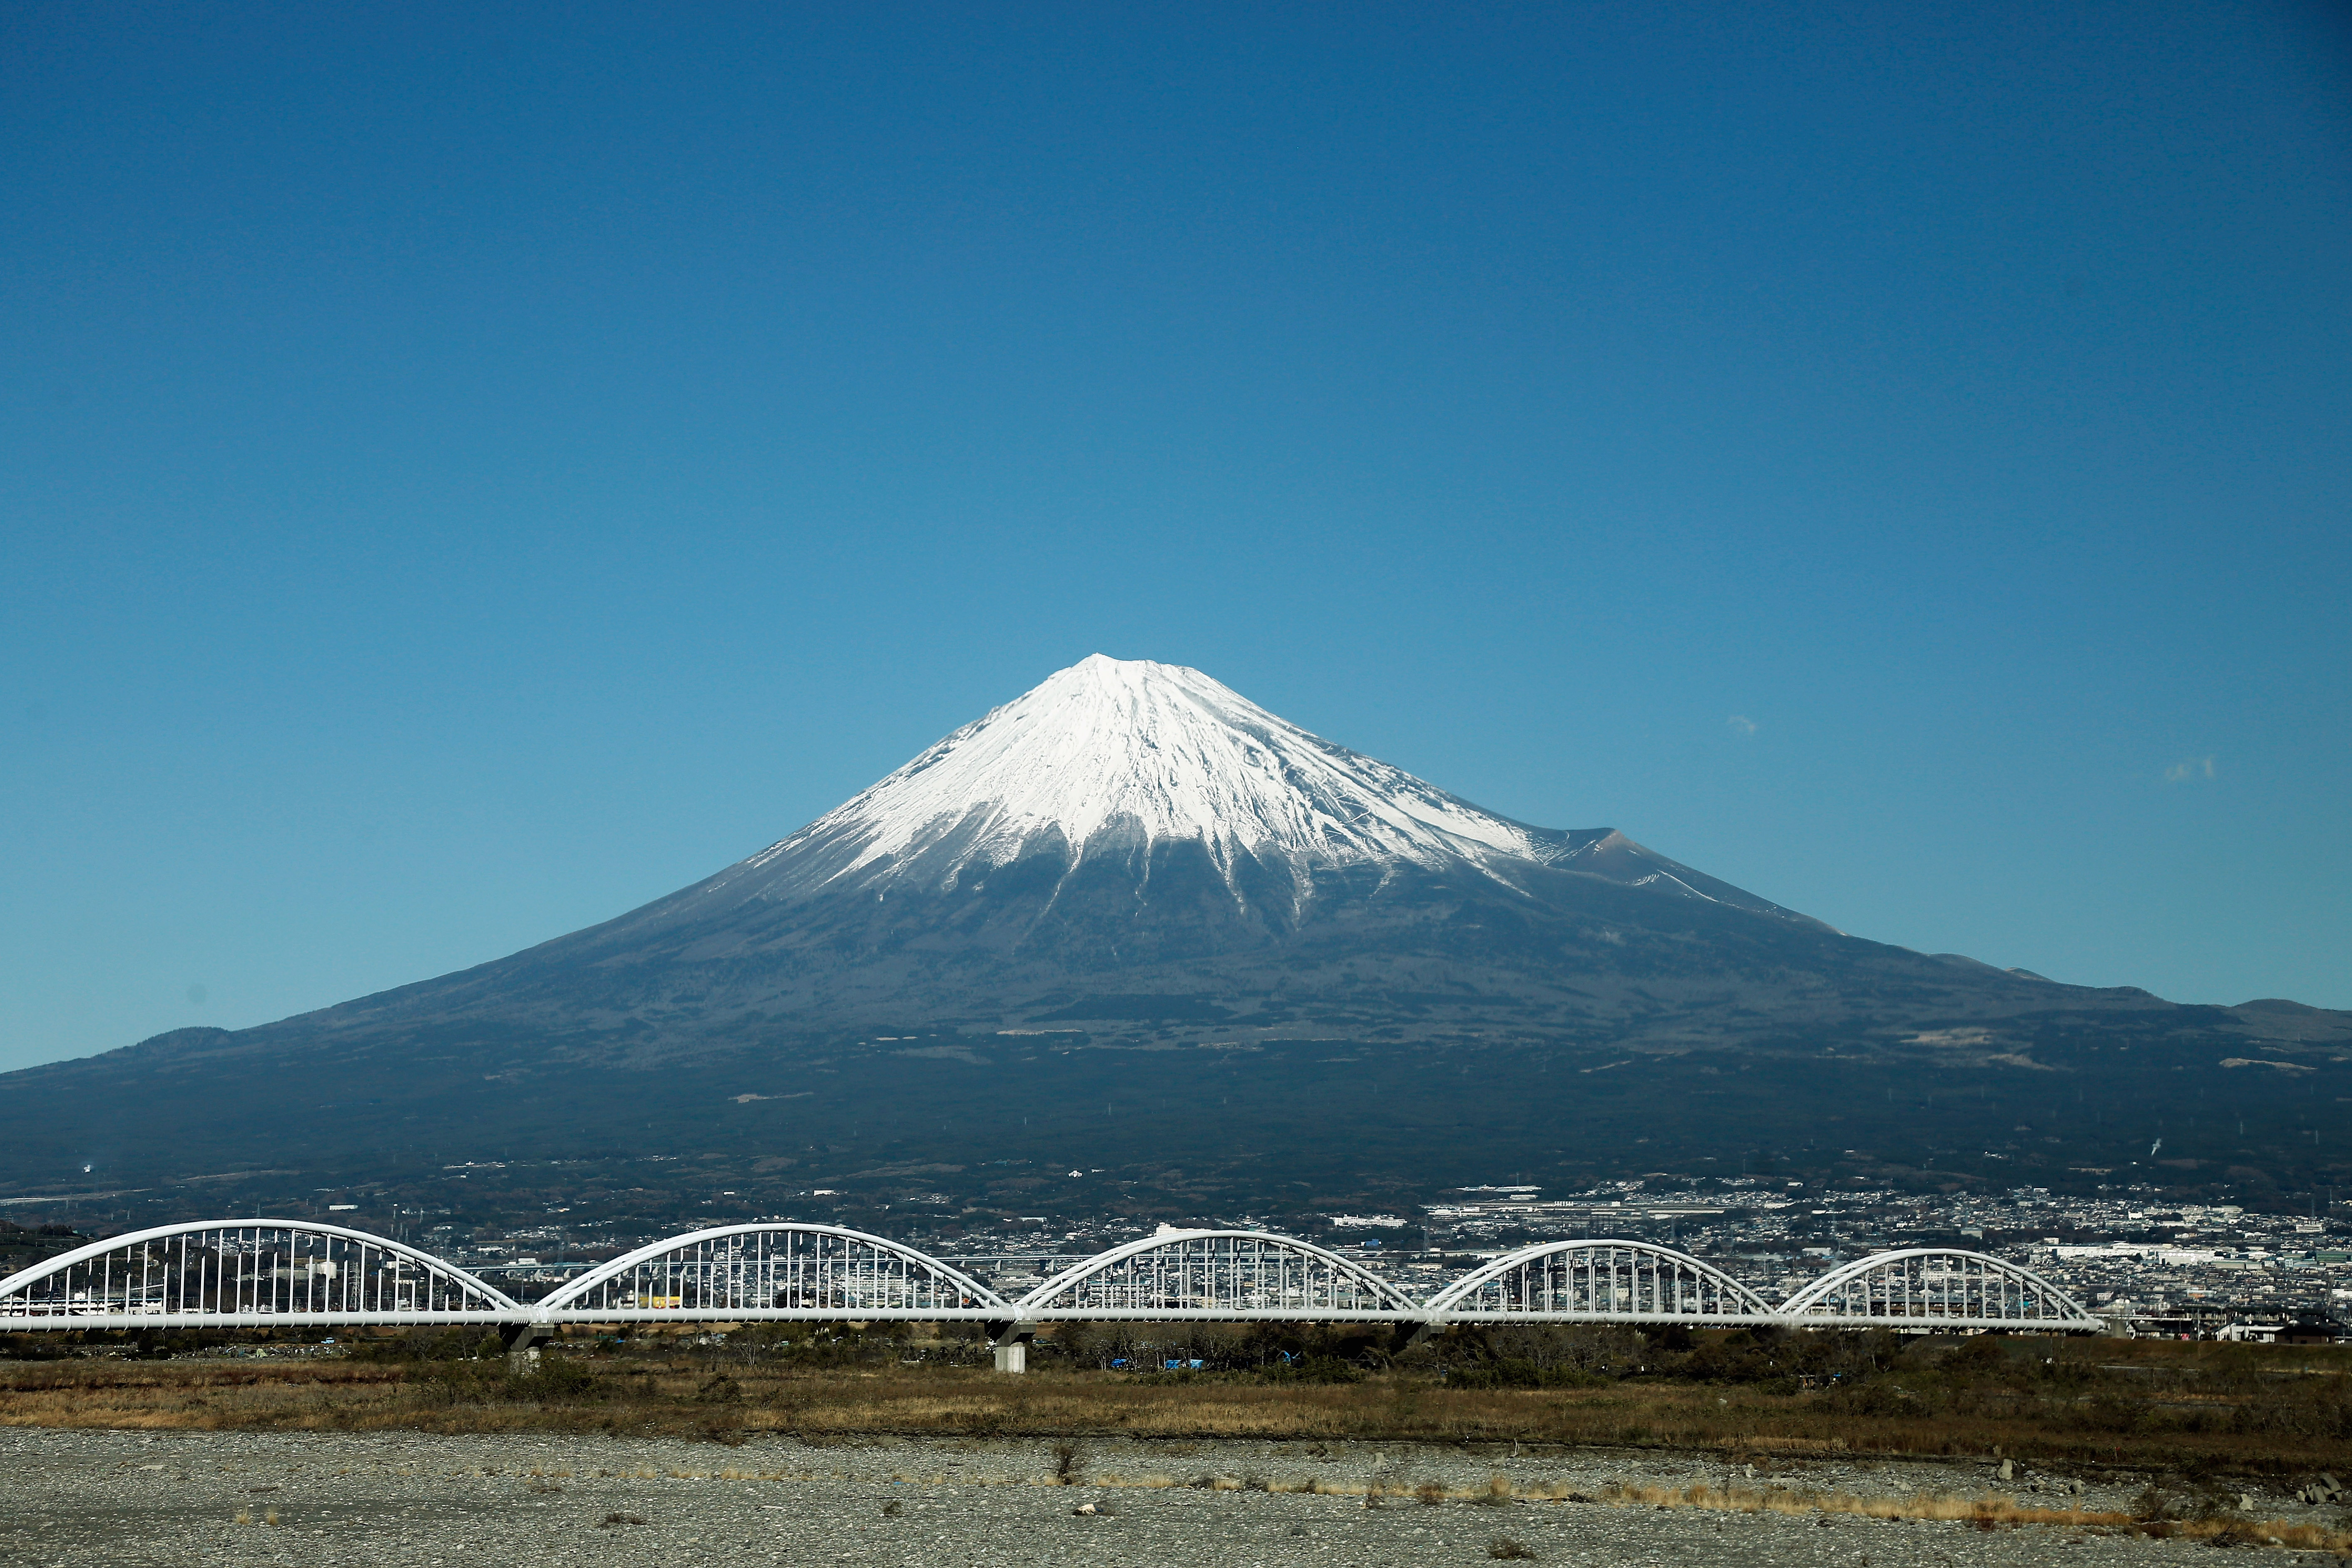 Will Mt. Fuji Erupt Soon? Don't Worry, Guys, It's Just In A "Critical